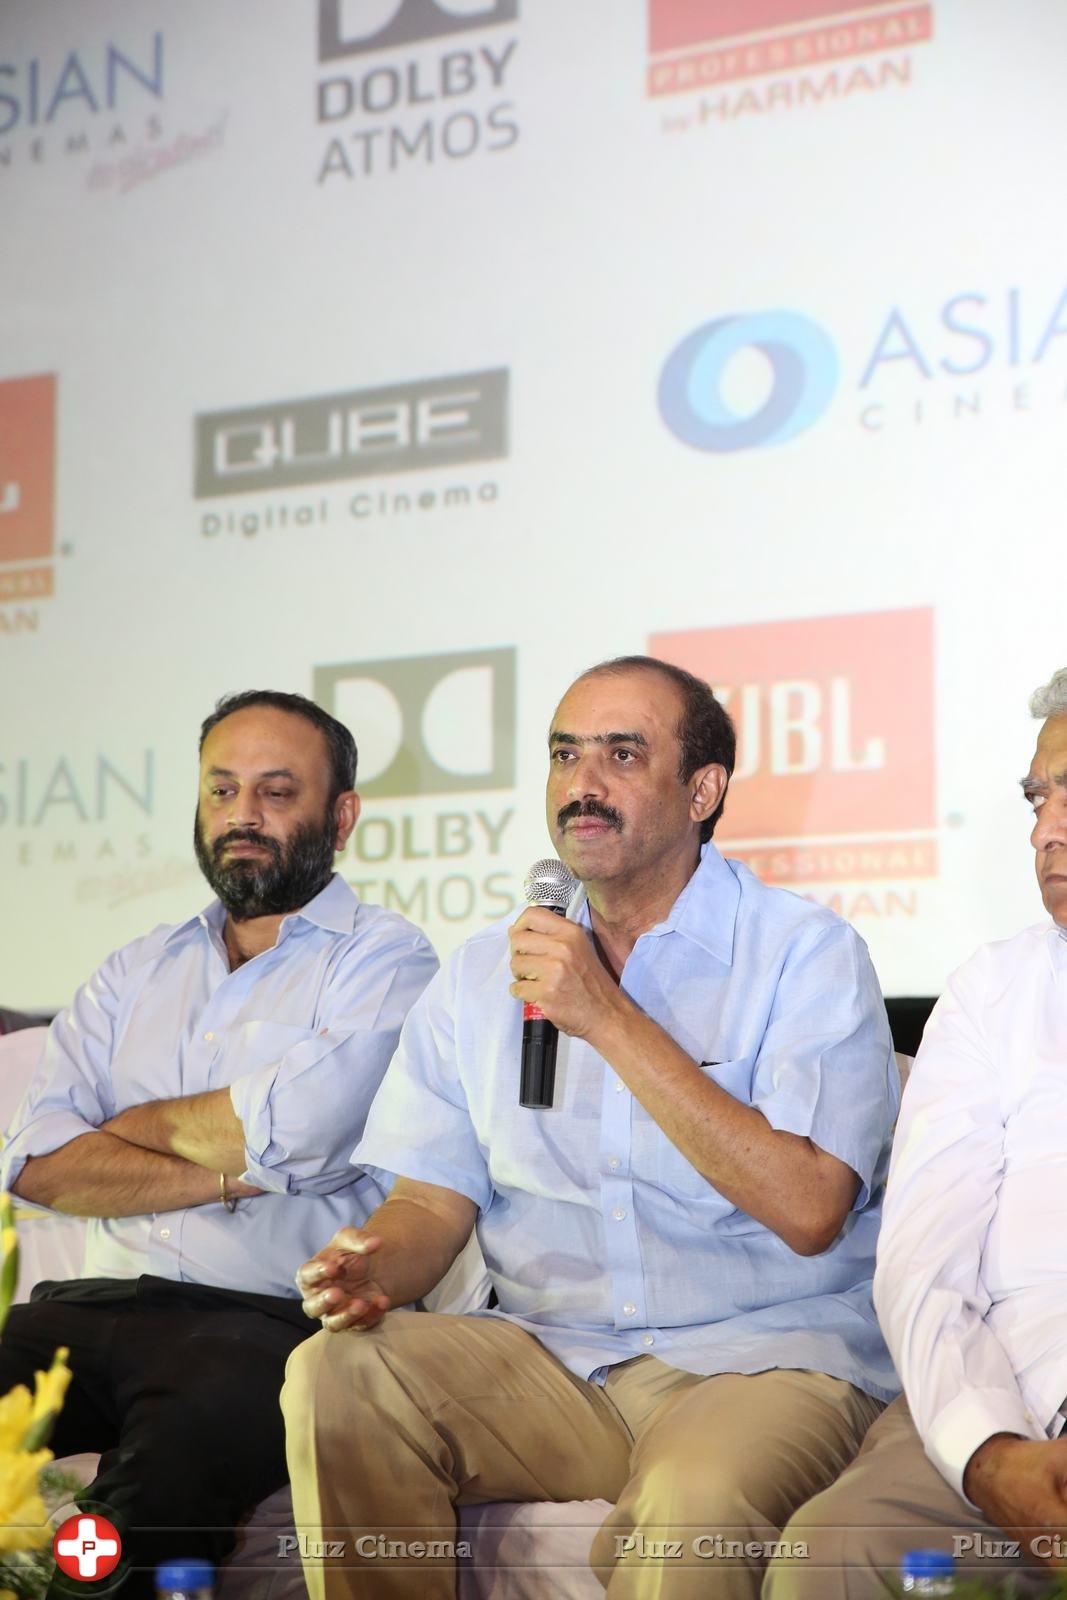 Dolby Atmos Sound System Launch by Suresh Babu at Asian Cinemas Stills | Picture 1179744